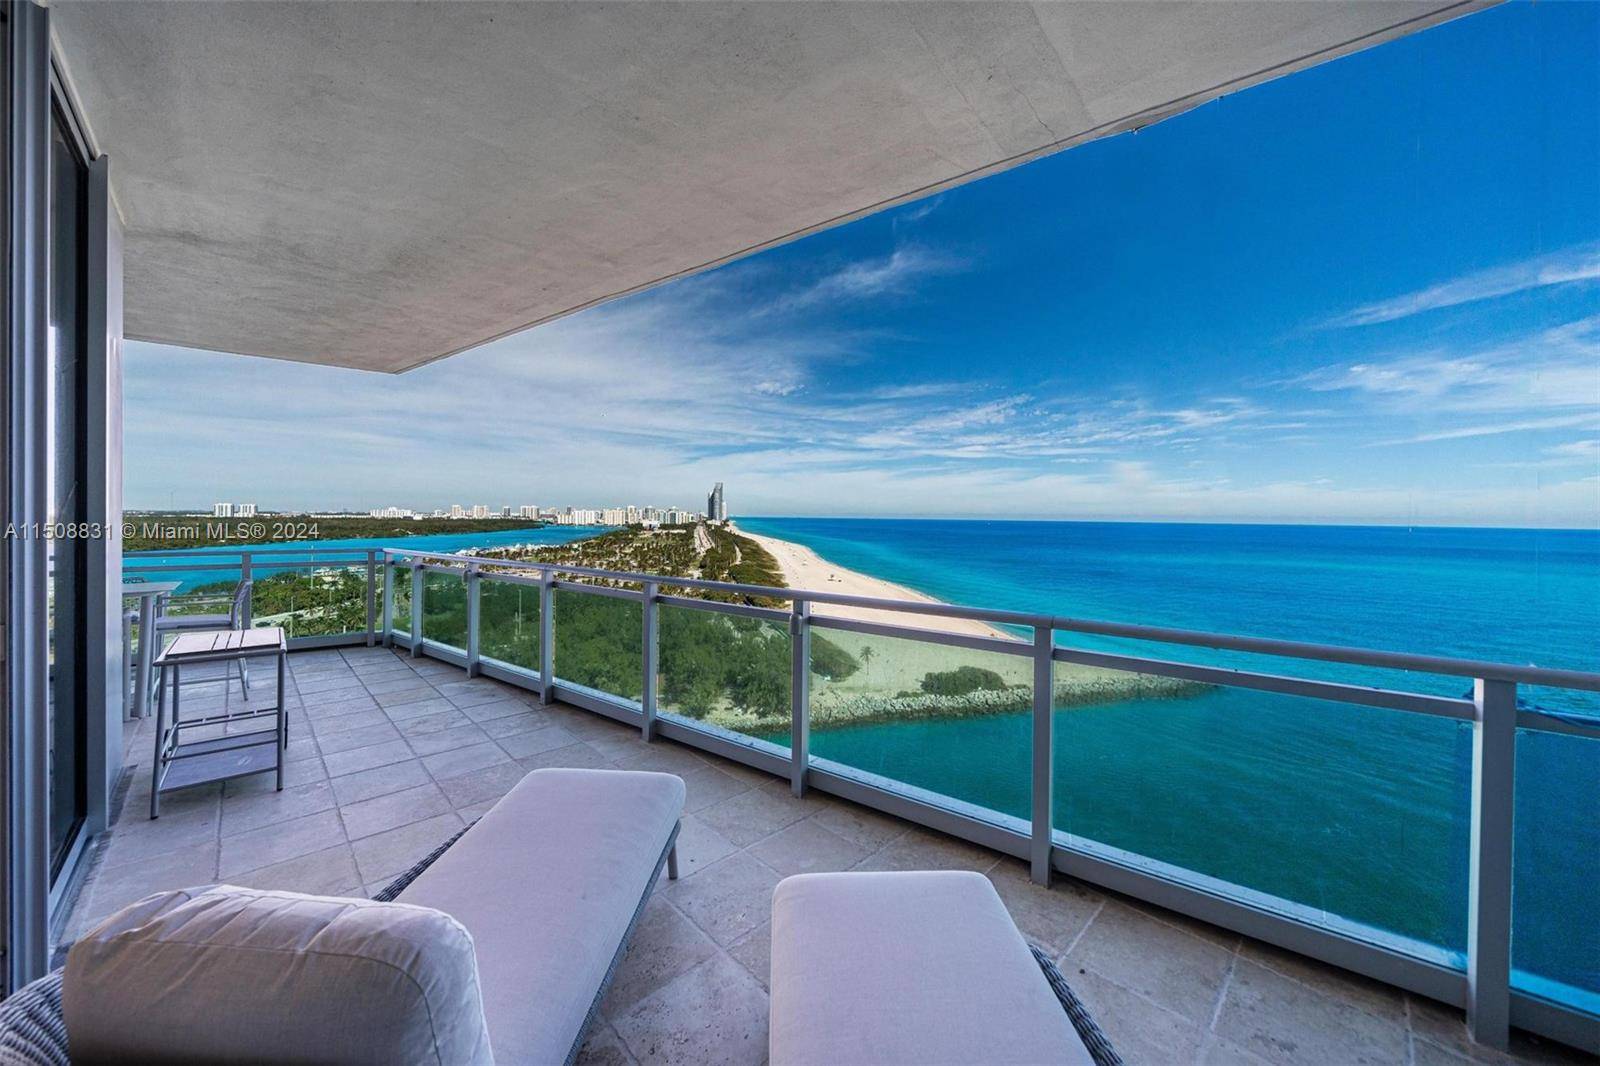 Best on the Beach, This Luxury Residences awaits you at The Ritz Carlton in the highly sought after Bal Harbour neighborhood.